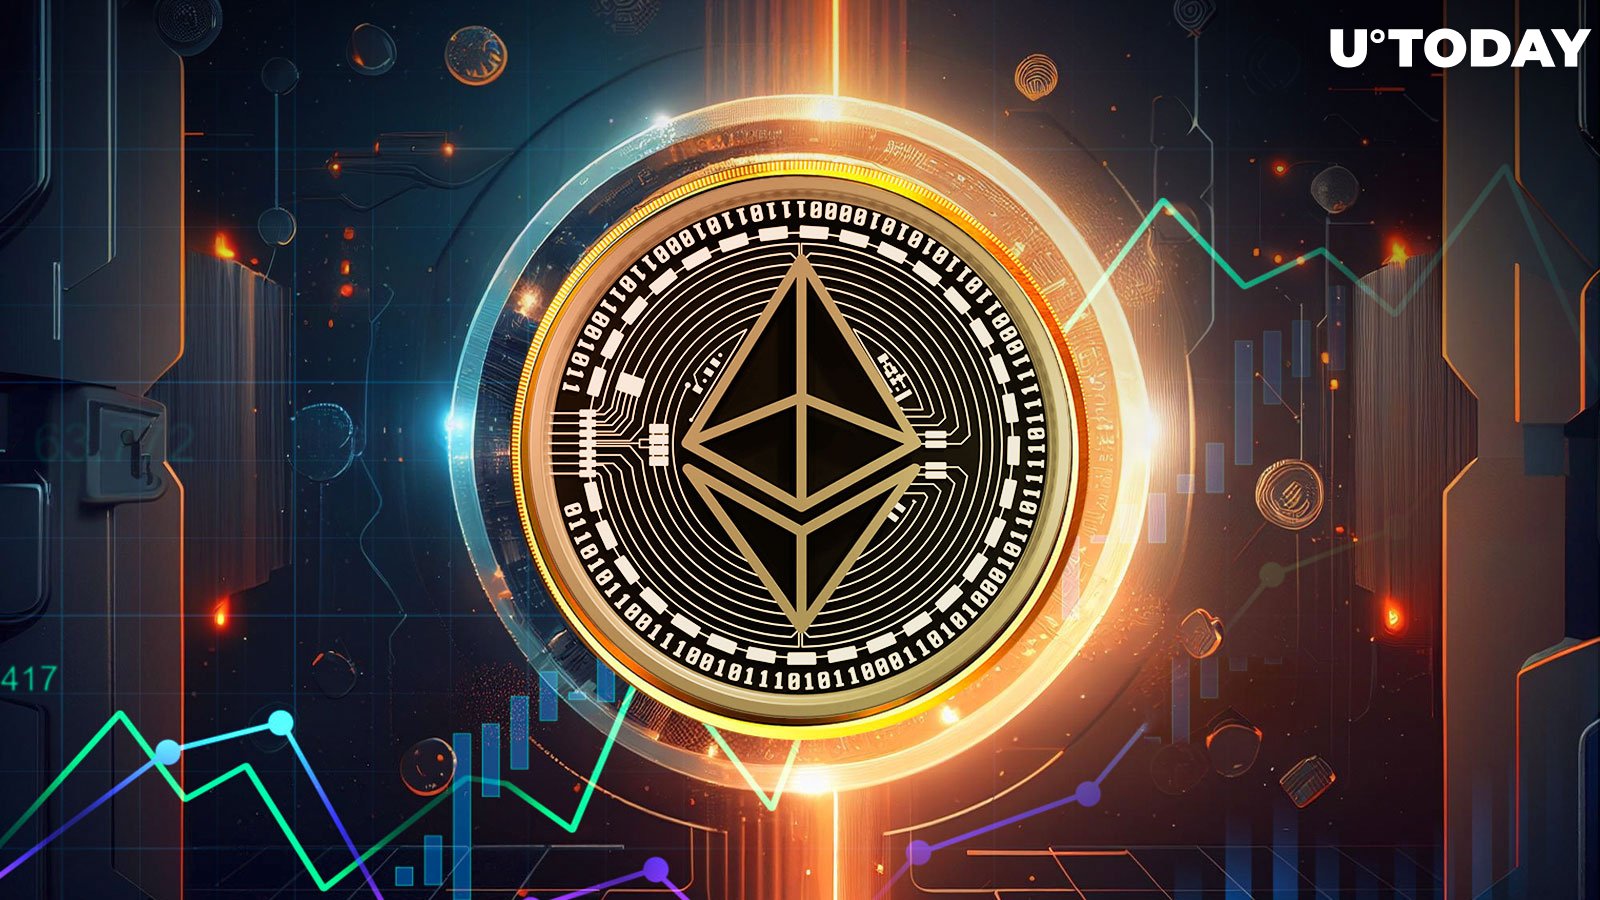 Ethereum (ETH) approaches $4,000 for the first time since late 2021 